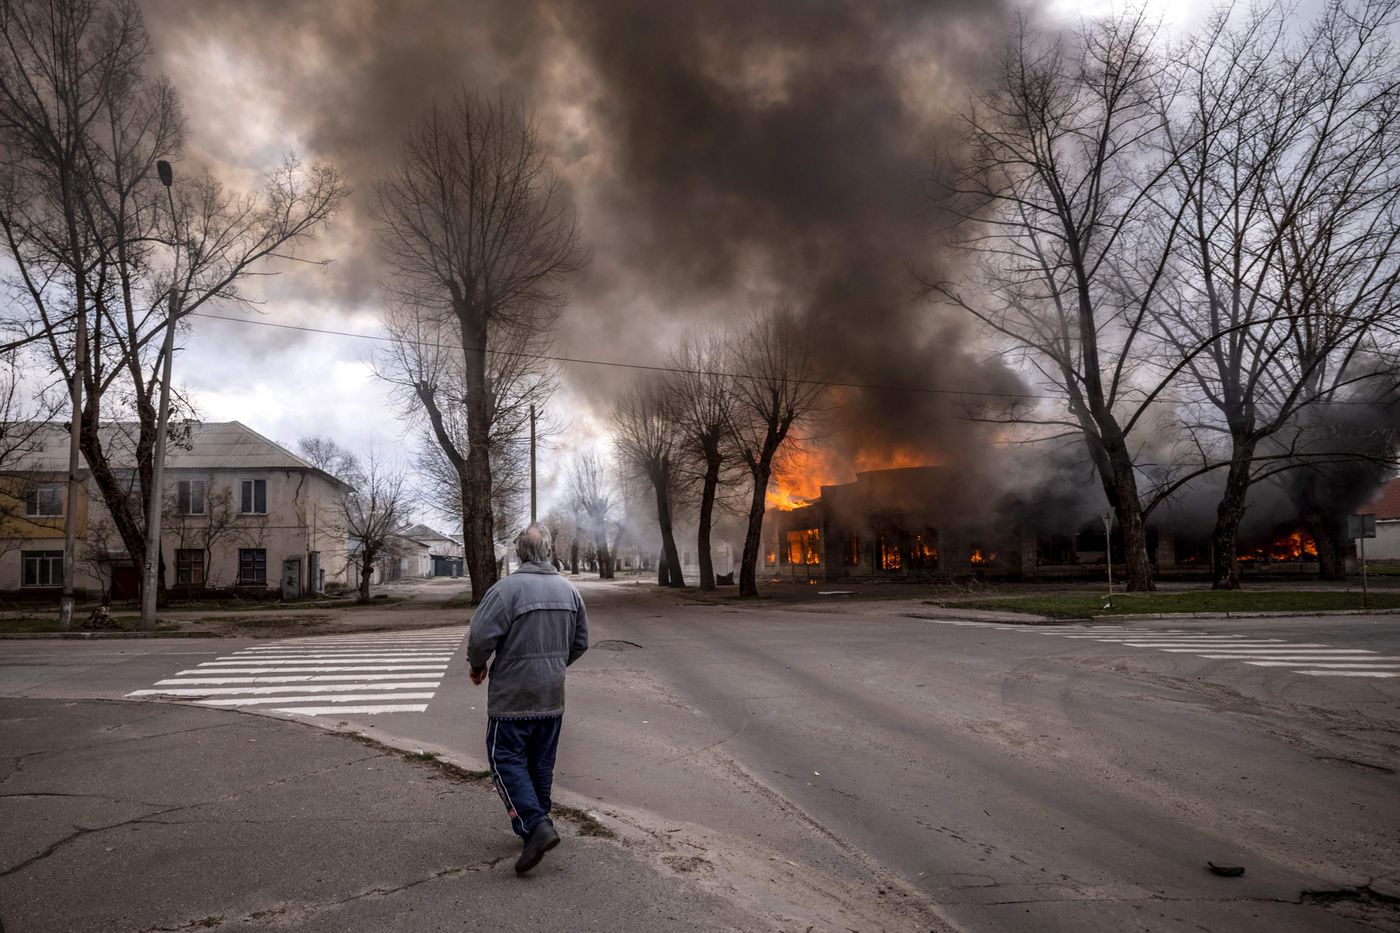 A building burns following shelling in Severodonetsk, located in the Donbas&nbsp;region of eastern Ukraine, on April 6. Western allies and Ukrainian officials warn that Russia may try to take the entire area after being pushed back from the north and around Kyiv.&nbsp;